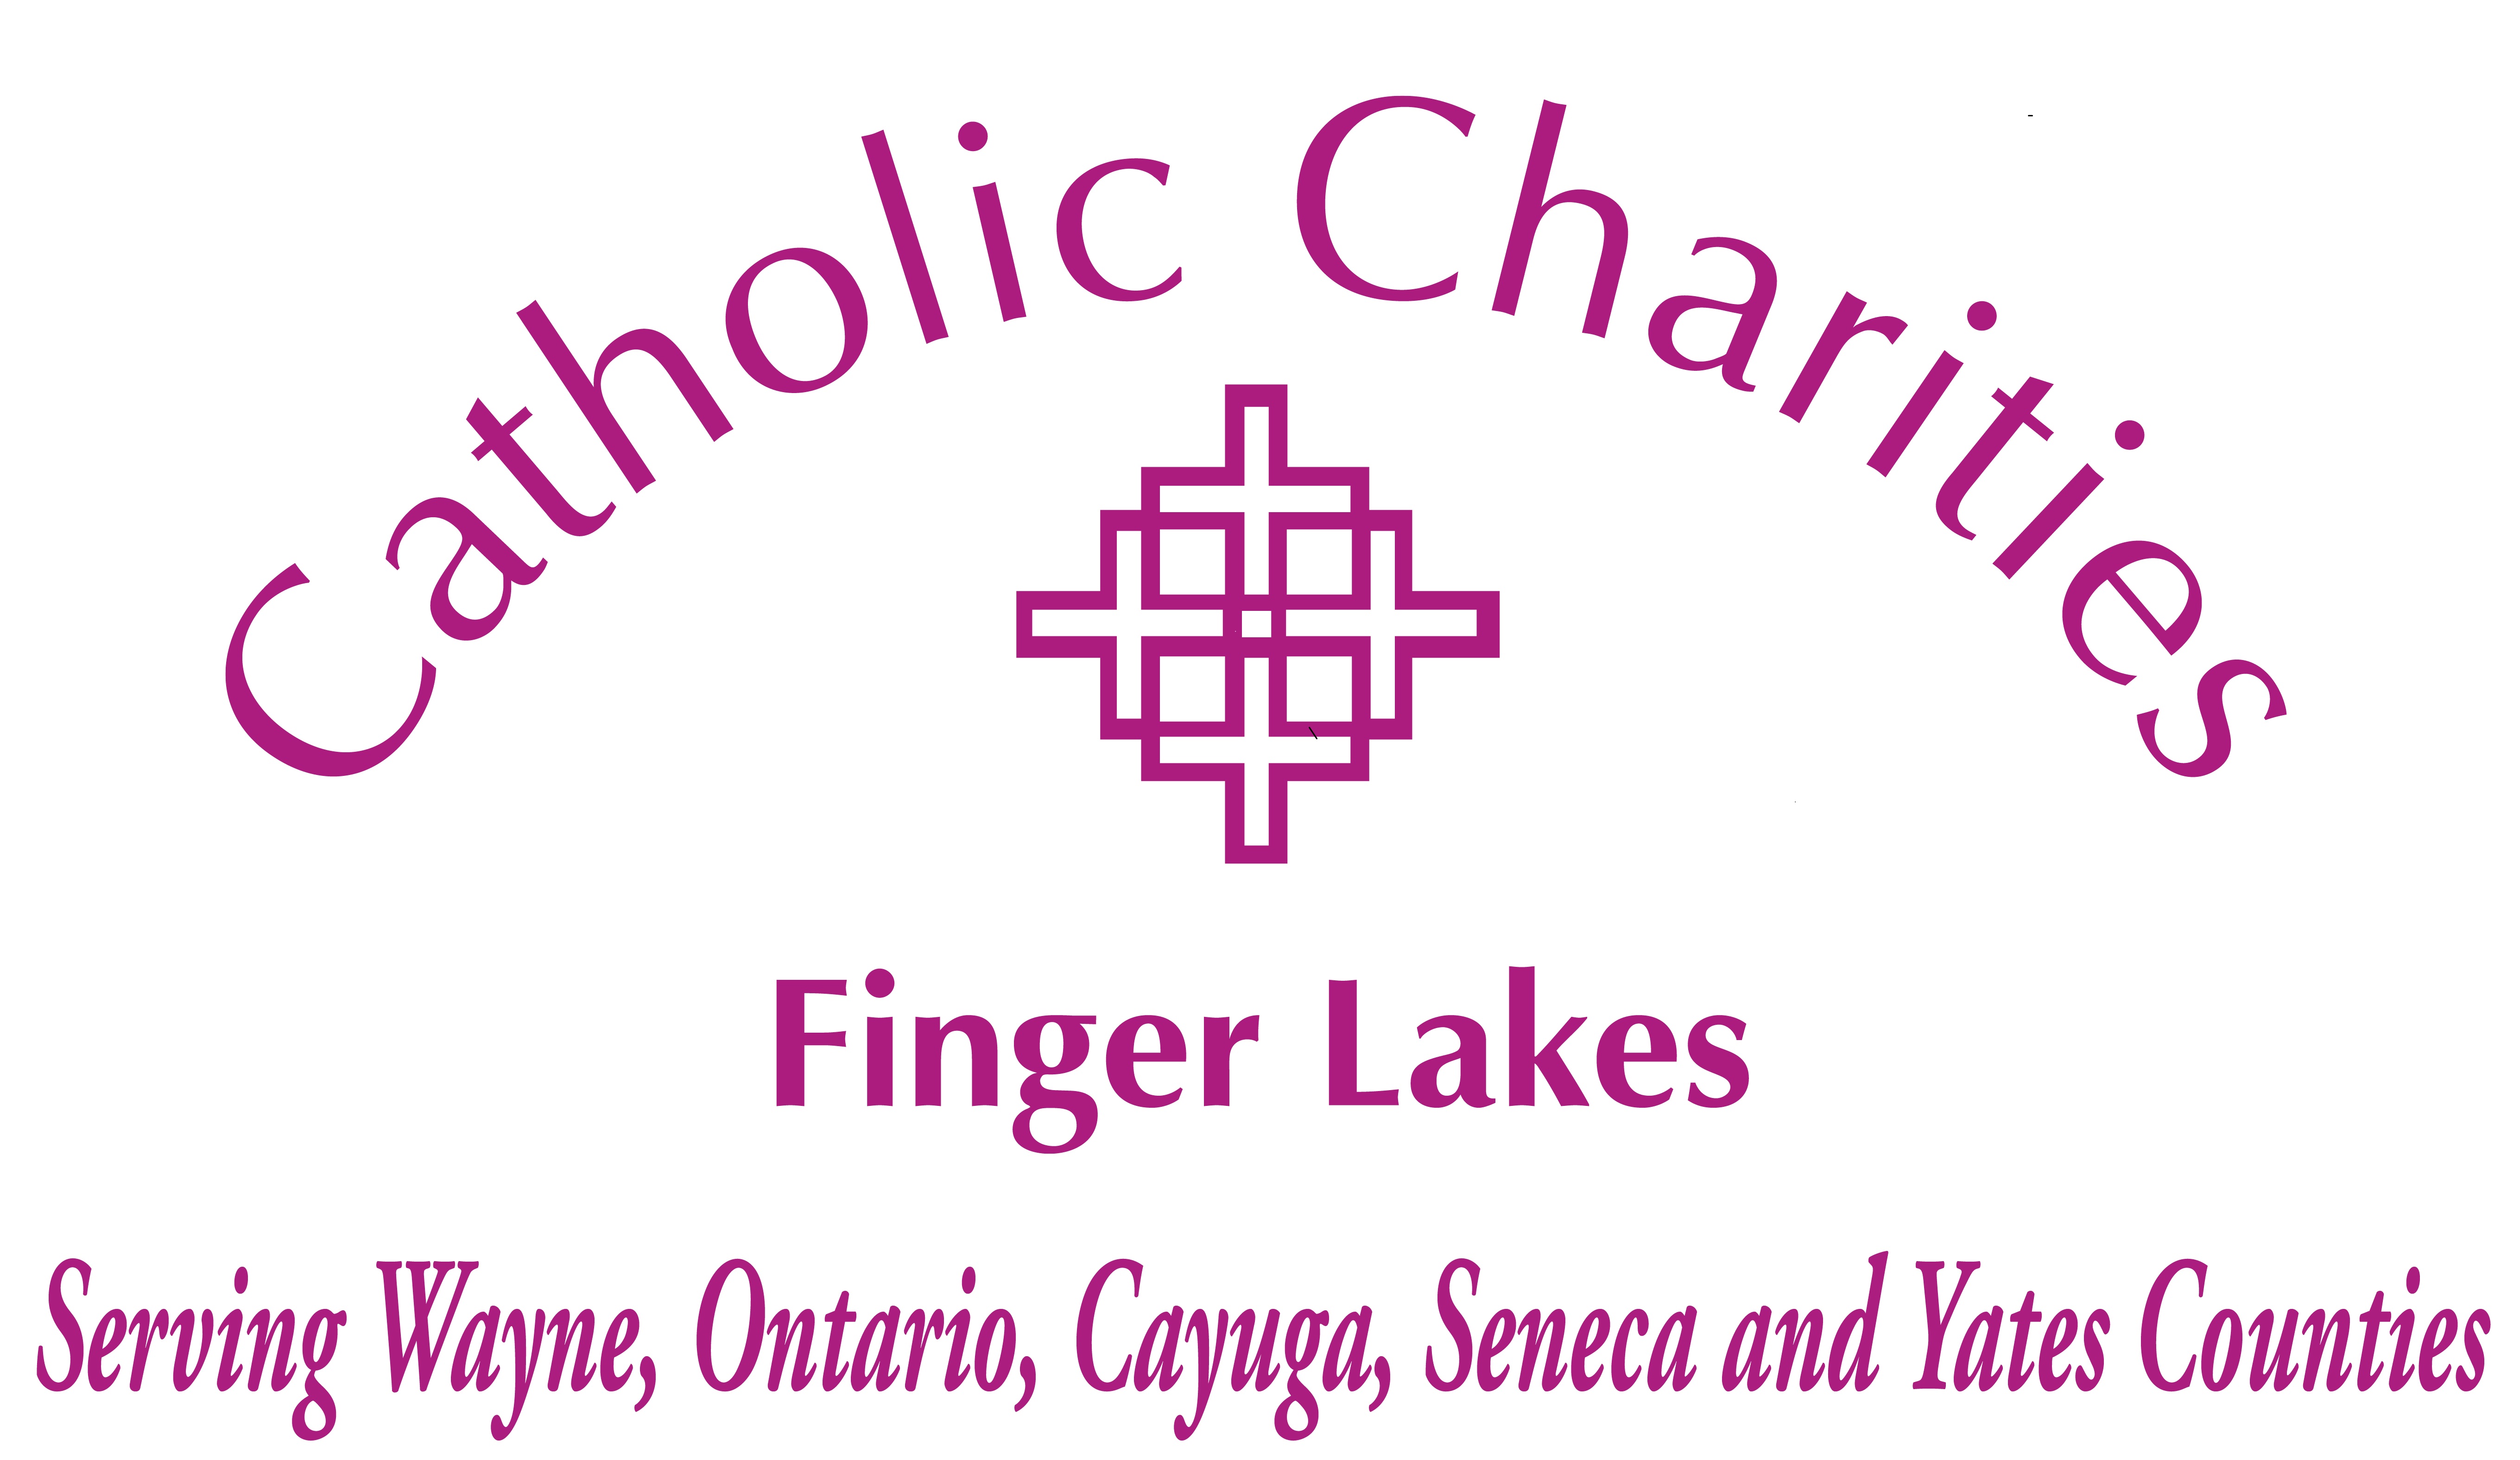 Catholic Charities of the Finger Lakes